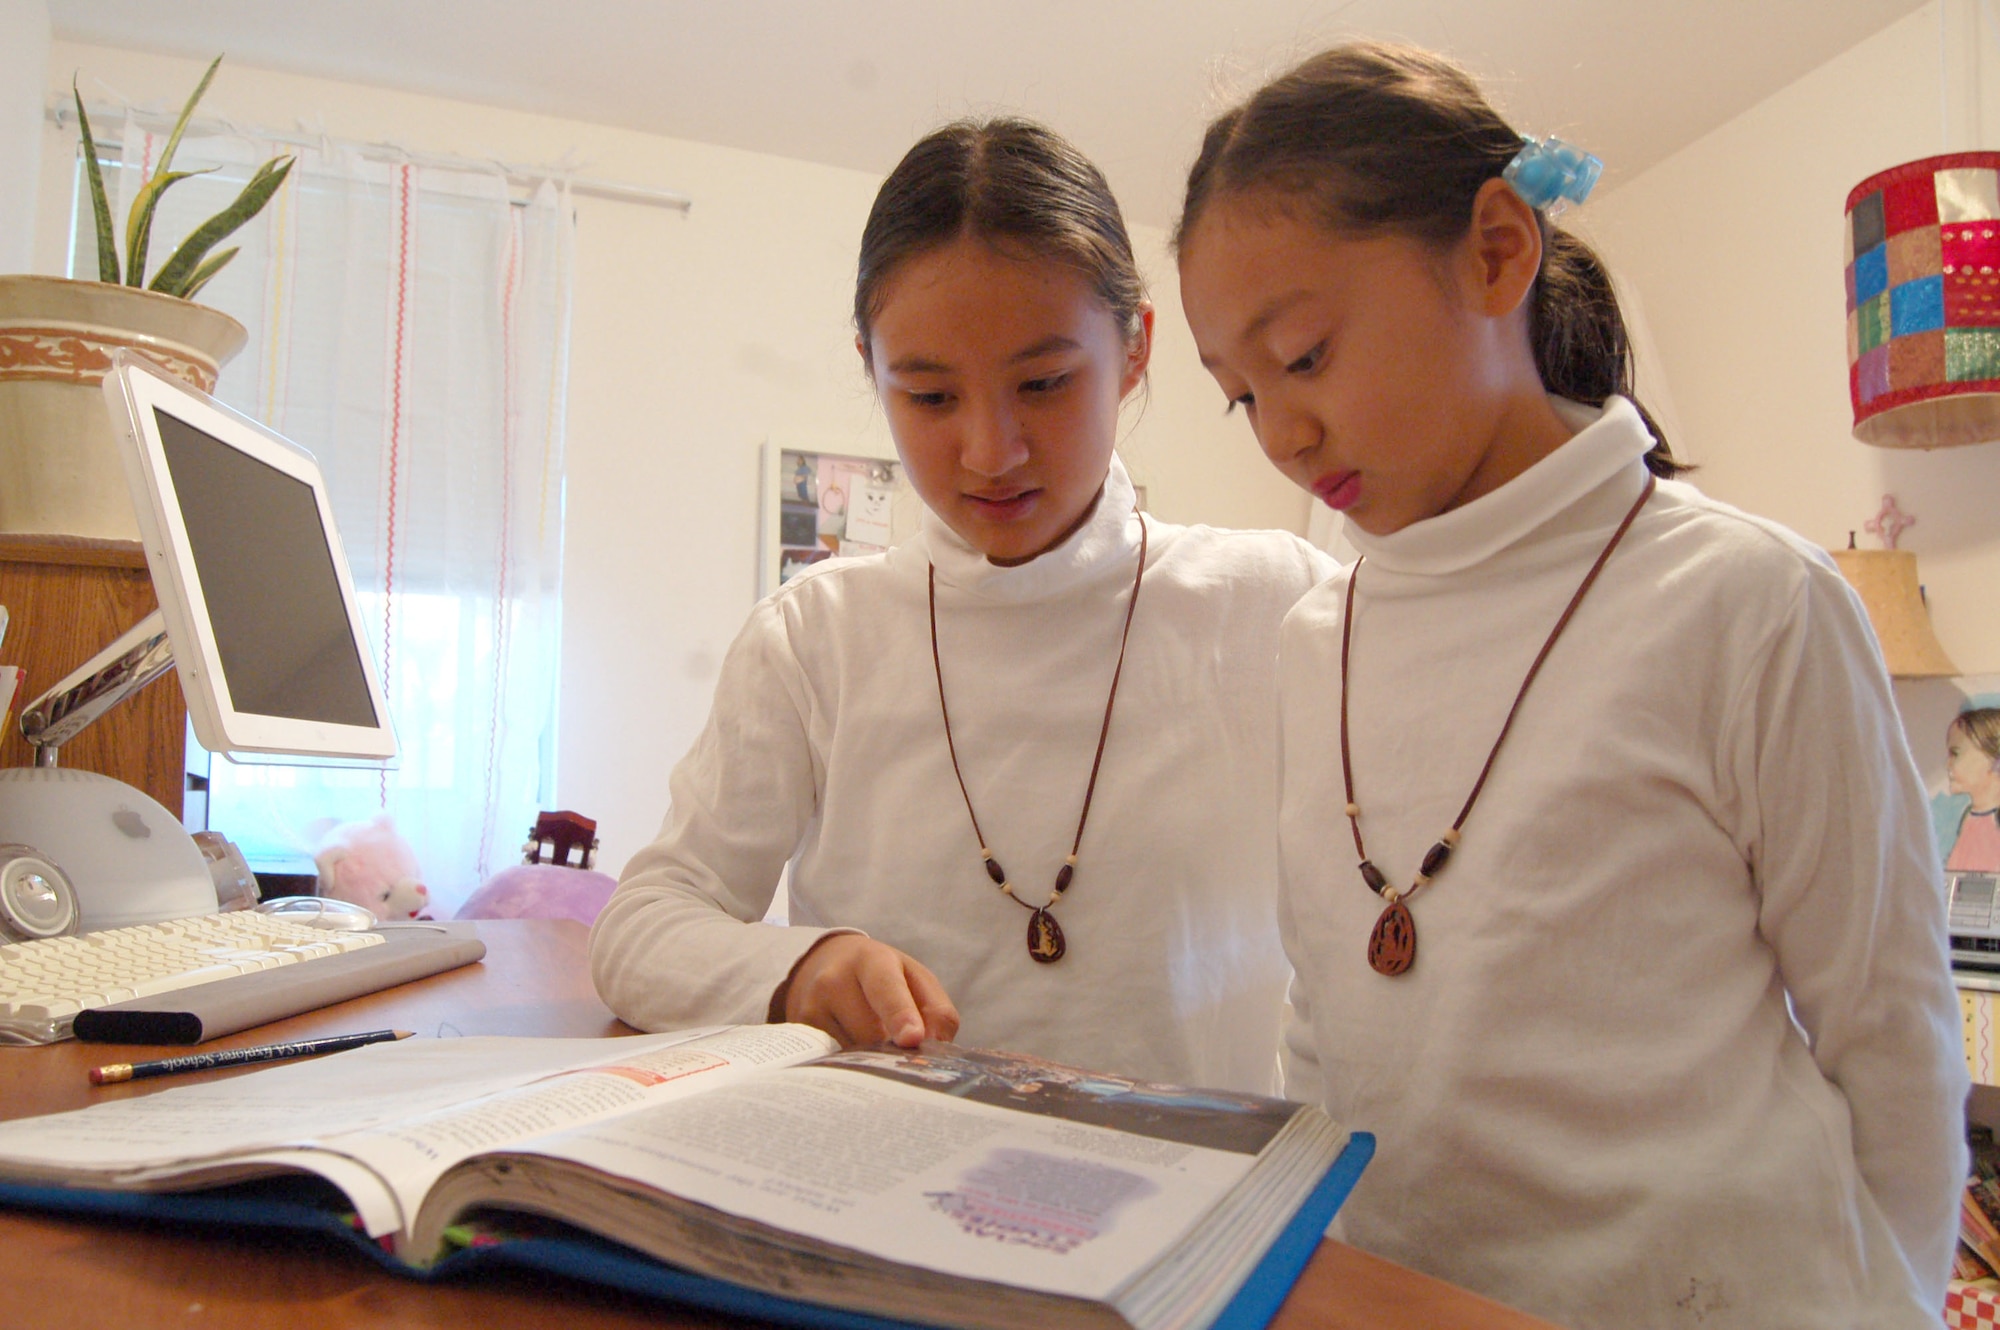 Isabella Millman (left), 11, a Branch Elementary School sixth grade student, shows her sister, Tiffany, 8, a Bailey Elementary School second grade student, her astronomy book. Isabella won second place in a national NASA essay contest. (Photo by Airman 1st Class Julius Delos Reyes)